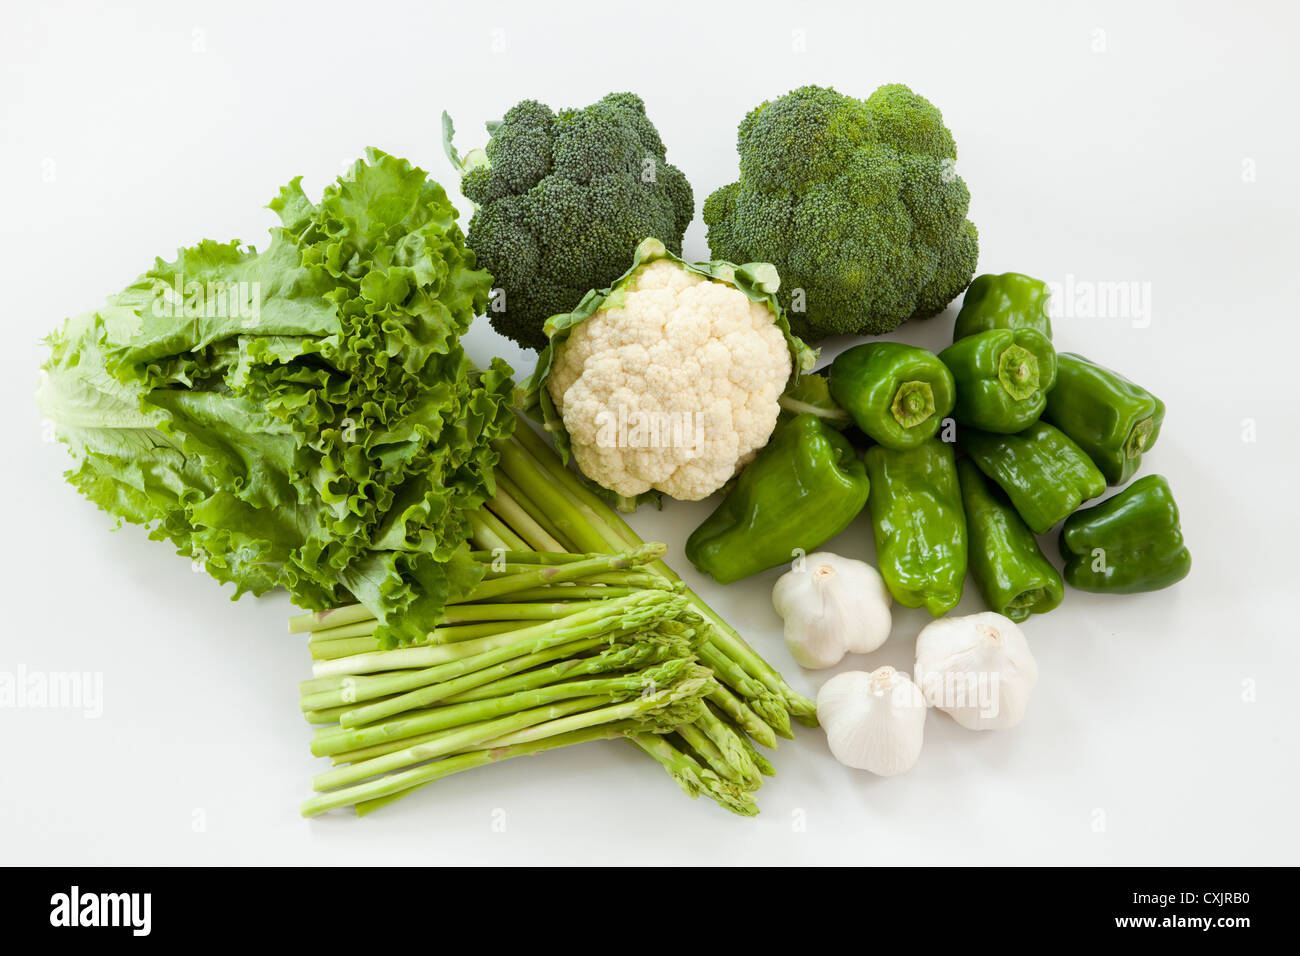 Group of green vegetables Stock Photo